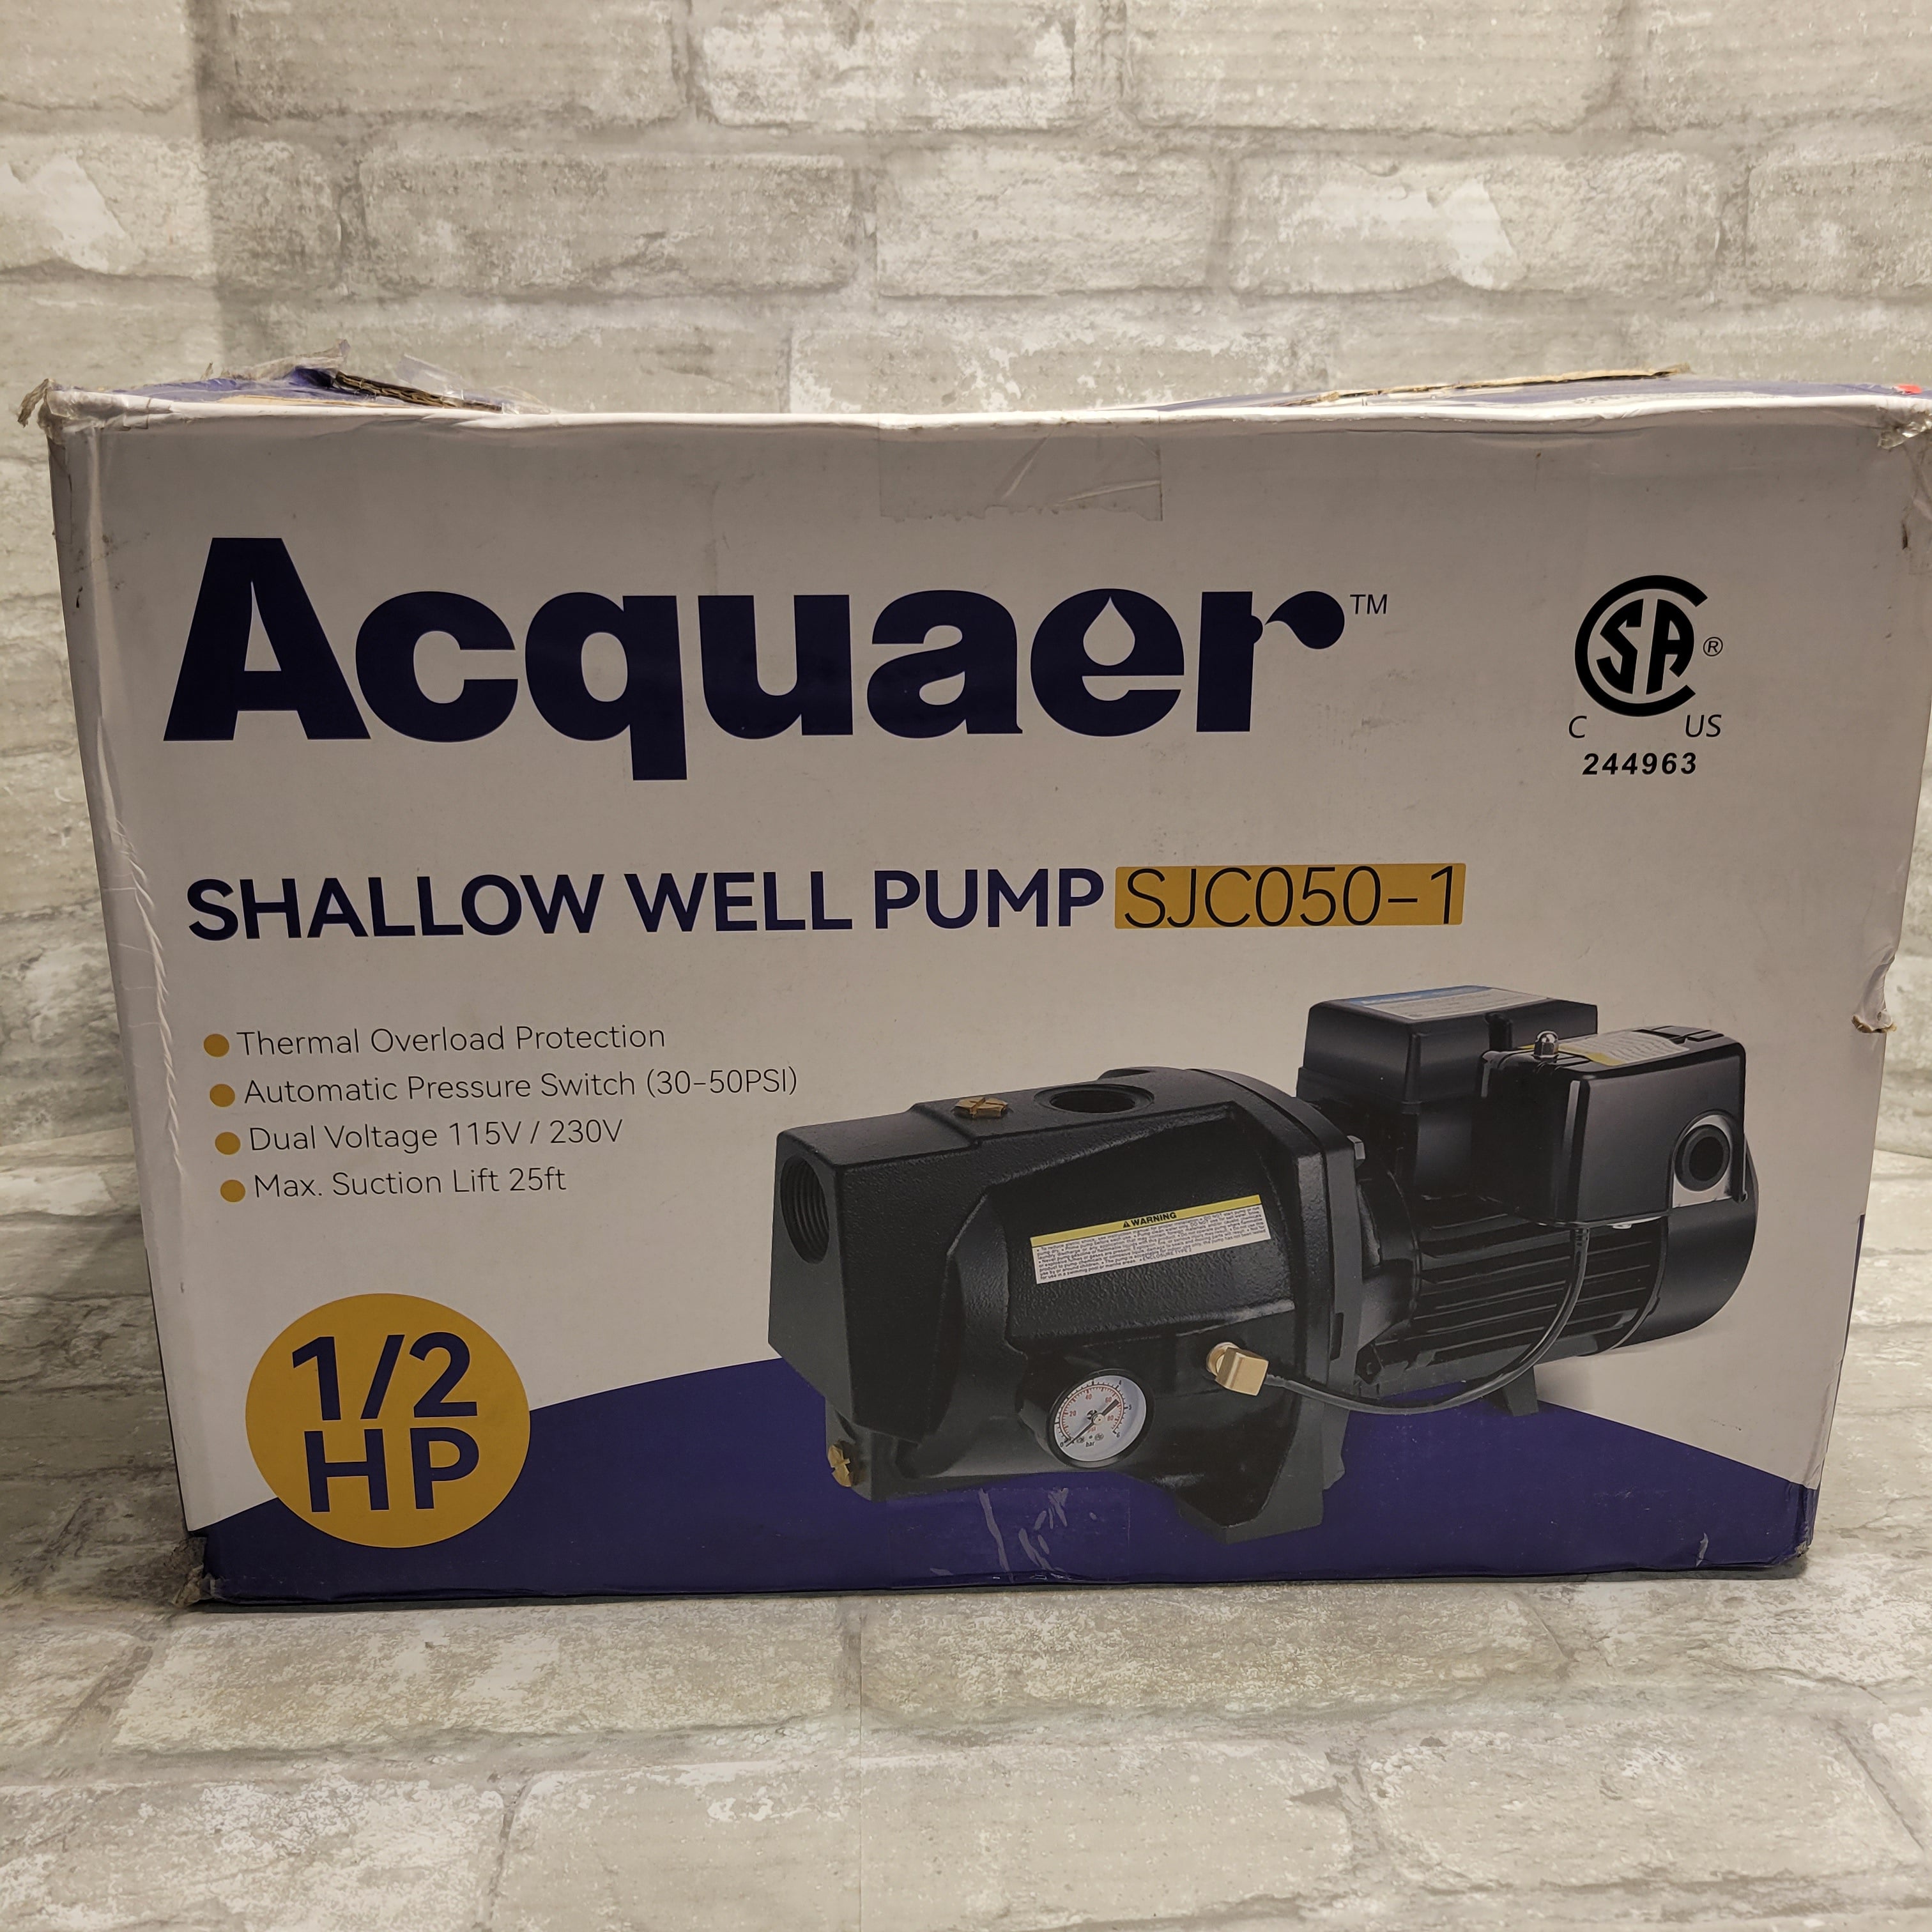 Acquaer 1/2HP Shallow Well Jet Pump, Cast Iron, Well Depth Up to 25ft (8030985912558)